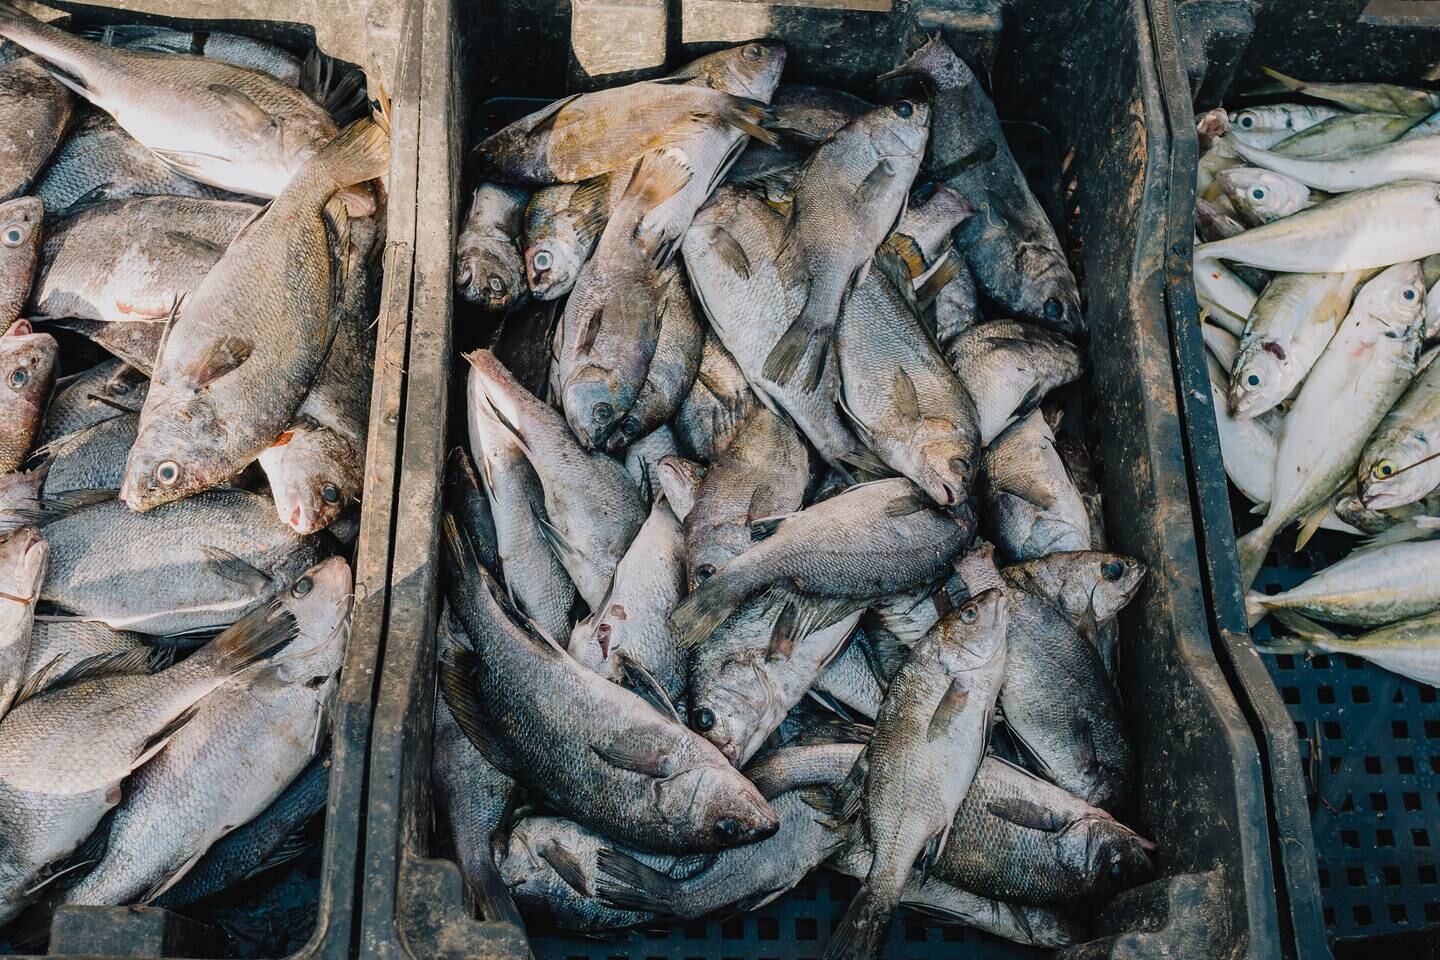 Fish caught to the north of the GCT plants show signs of poisoning from heavy metals and cancerous lesions caused by the radioactive particles in phosphogypsum. Erin Clare Brown / The National